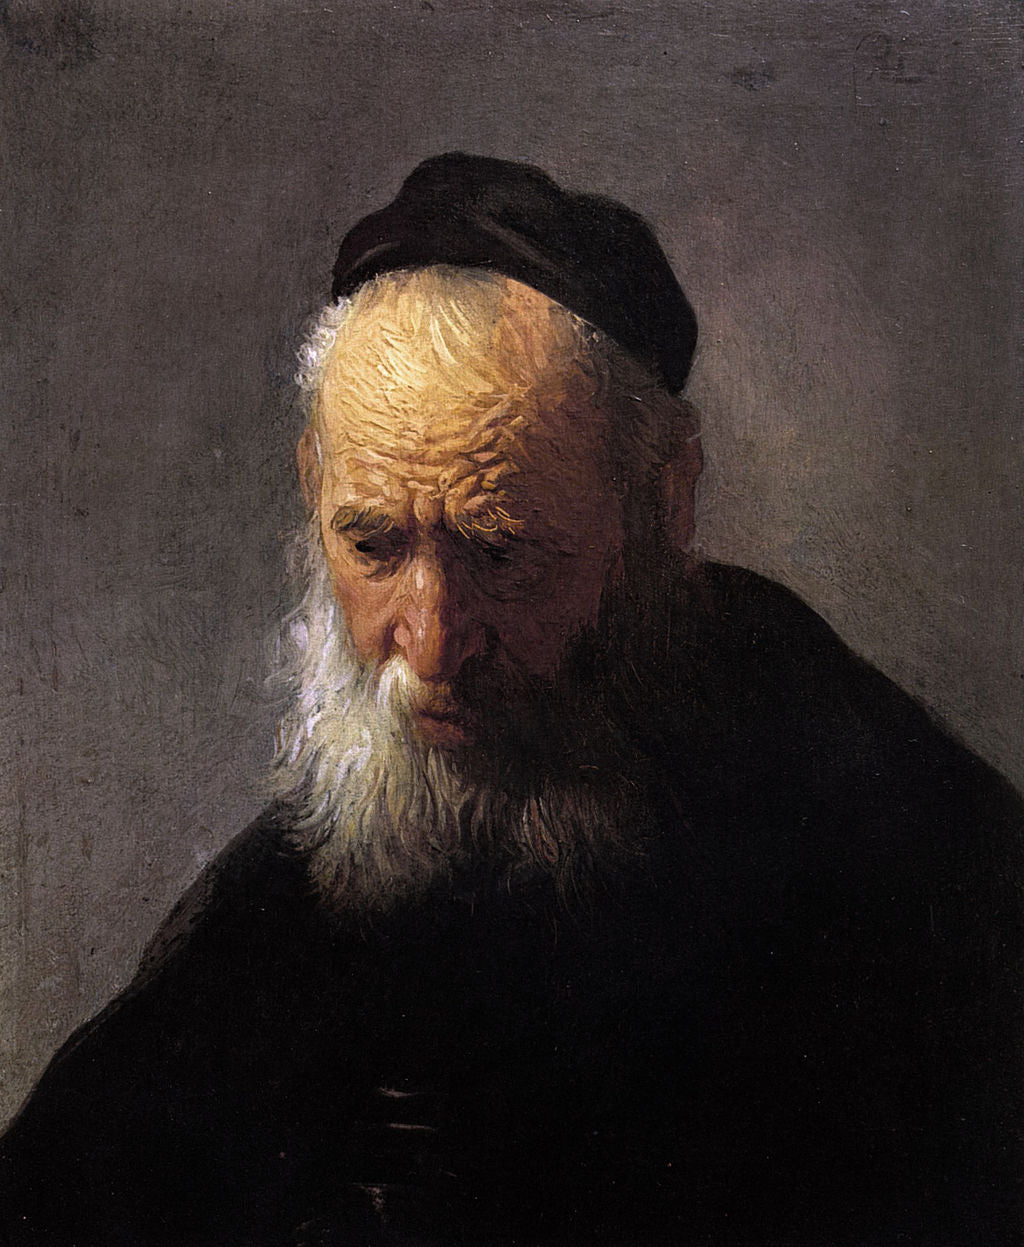 Oil Study of an Old Man Painting by Rembrandt Oil on Canvas Reproduction by Blue Surf Art